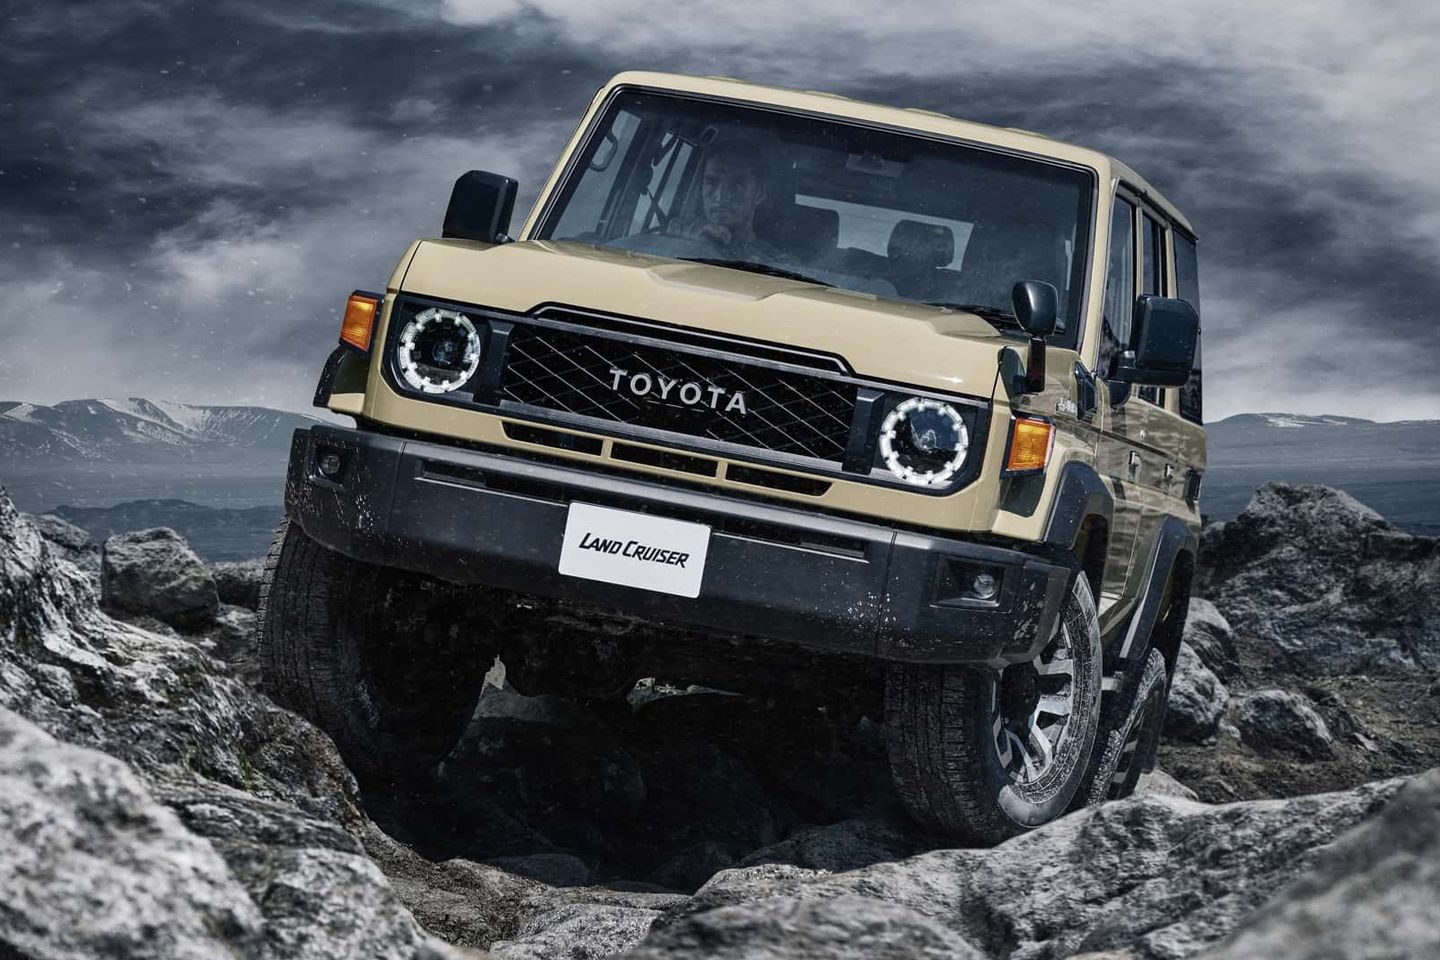 Toyota Land Cruiser Will 'Likely' Return to U.S., Exec Says